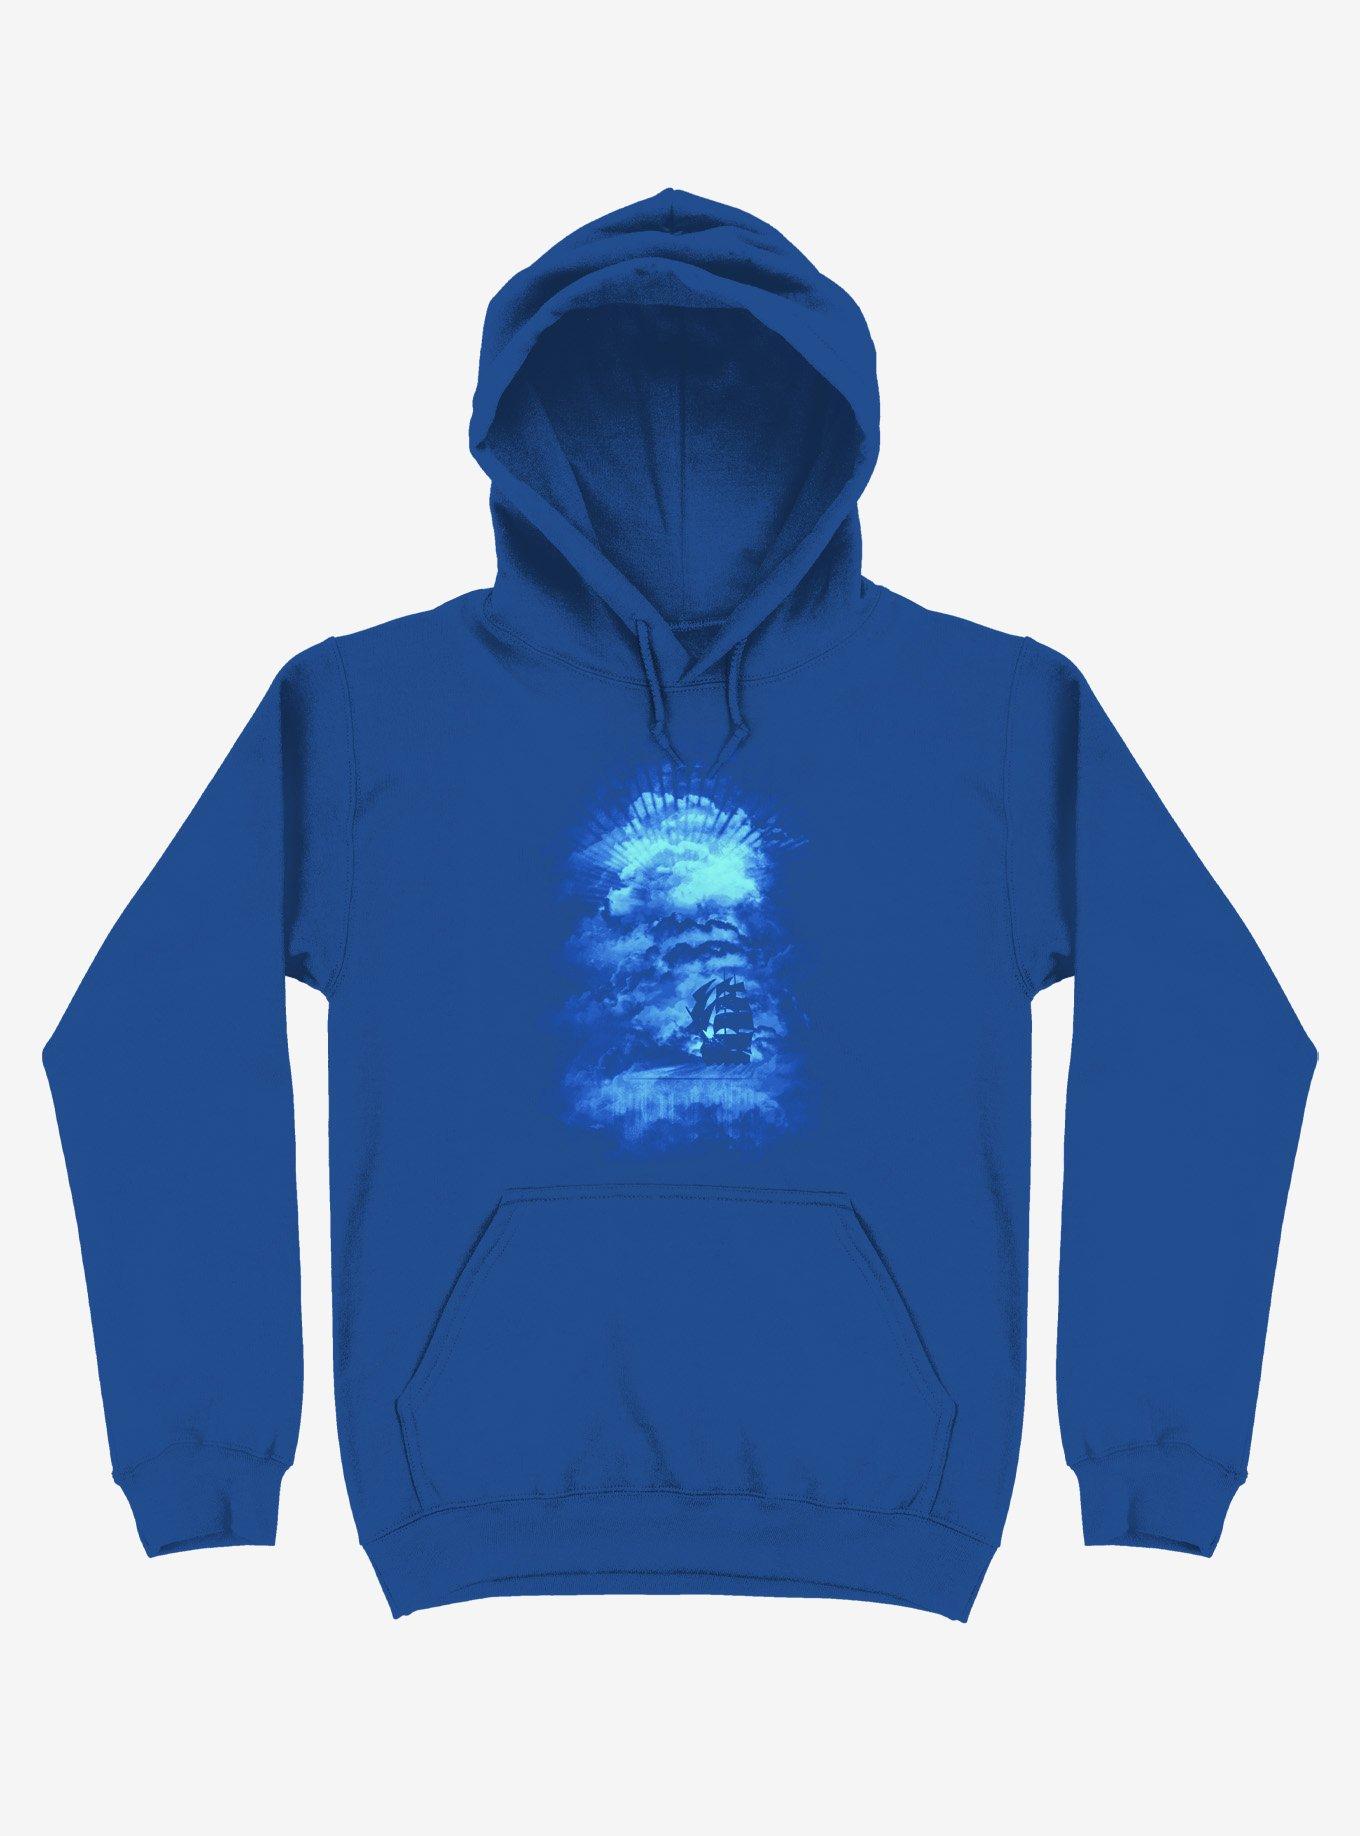 Ship Sailing To The End Of Bright World Royal Blue Hoodie